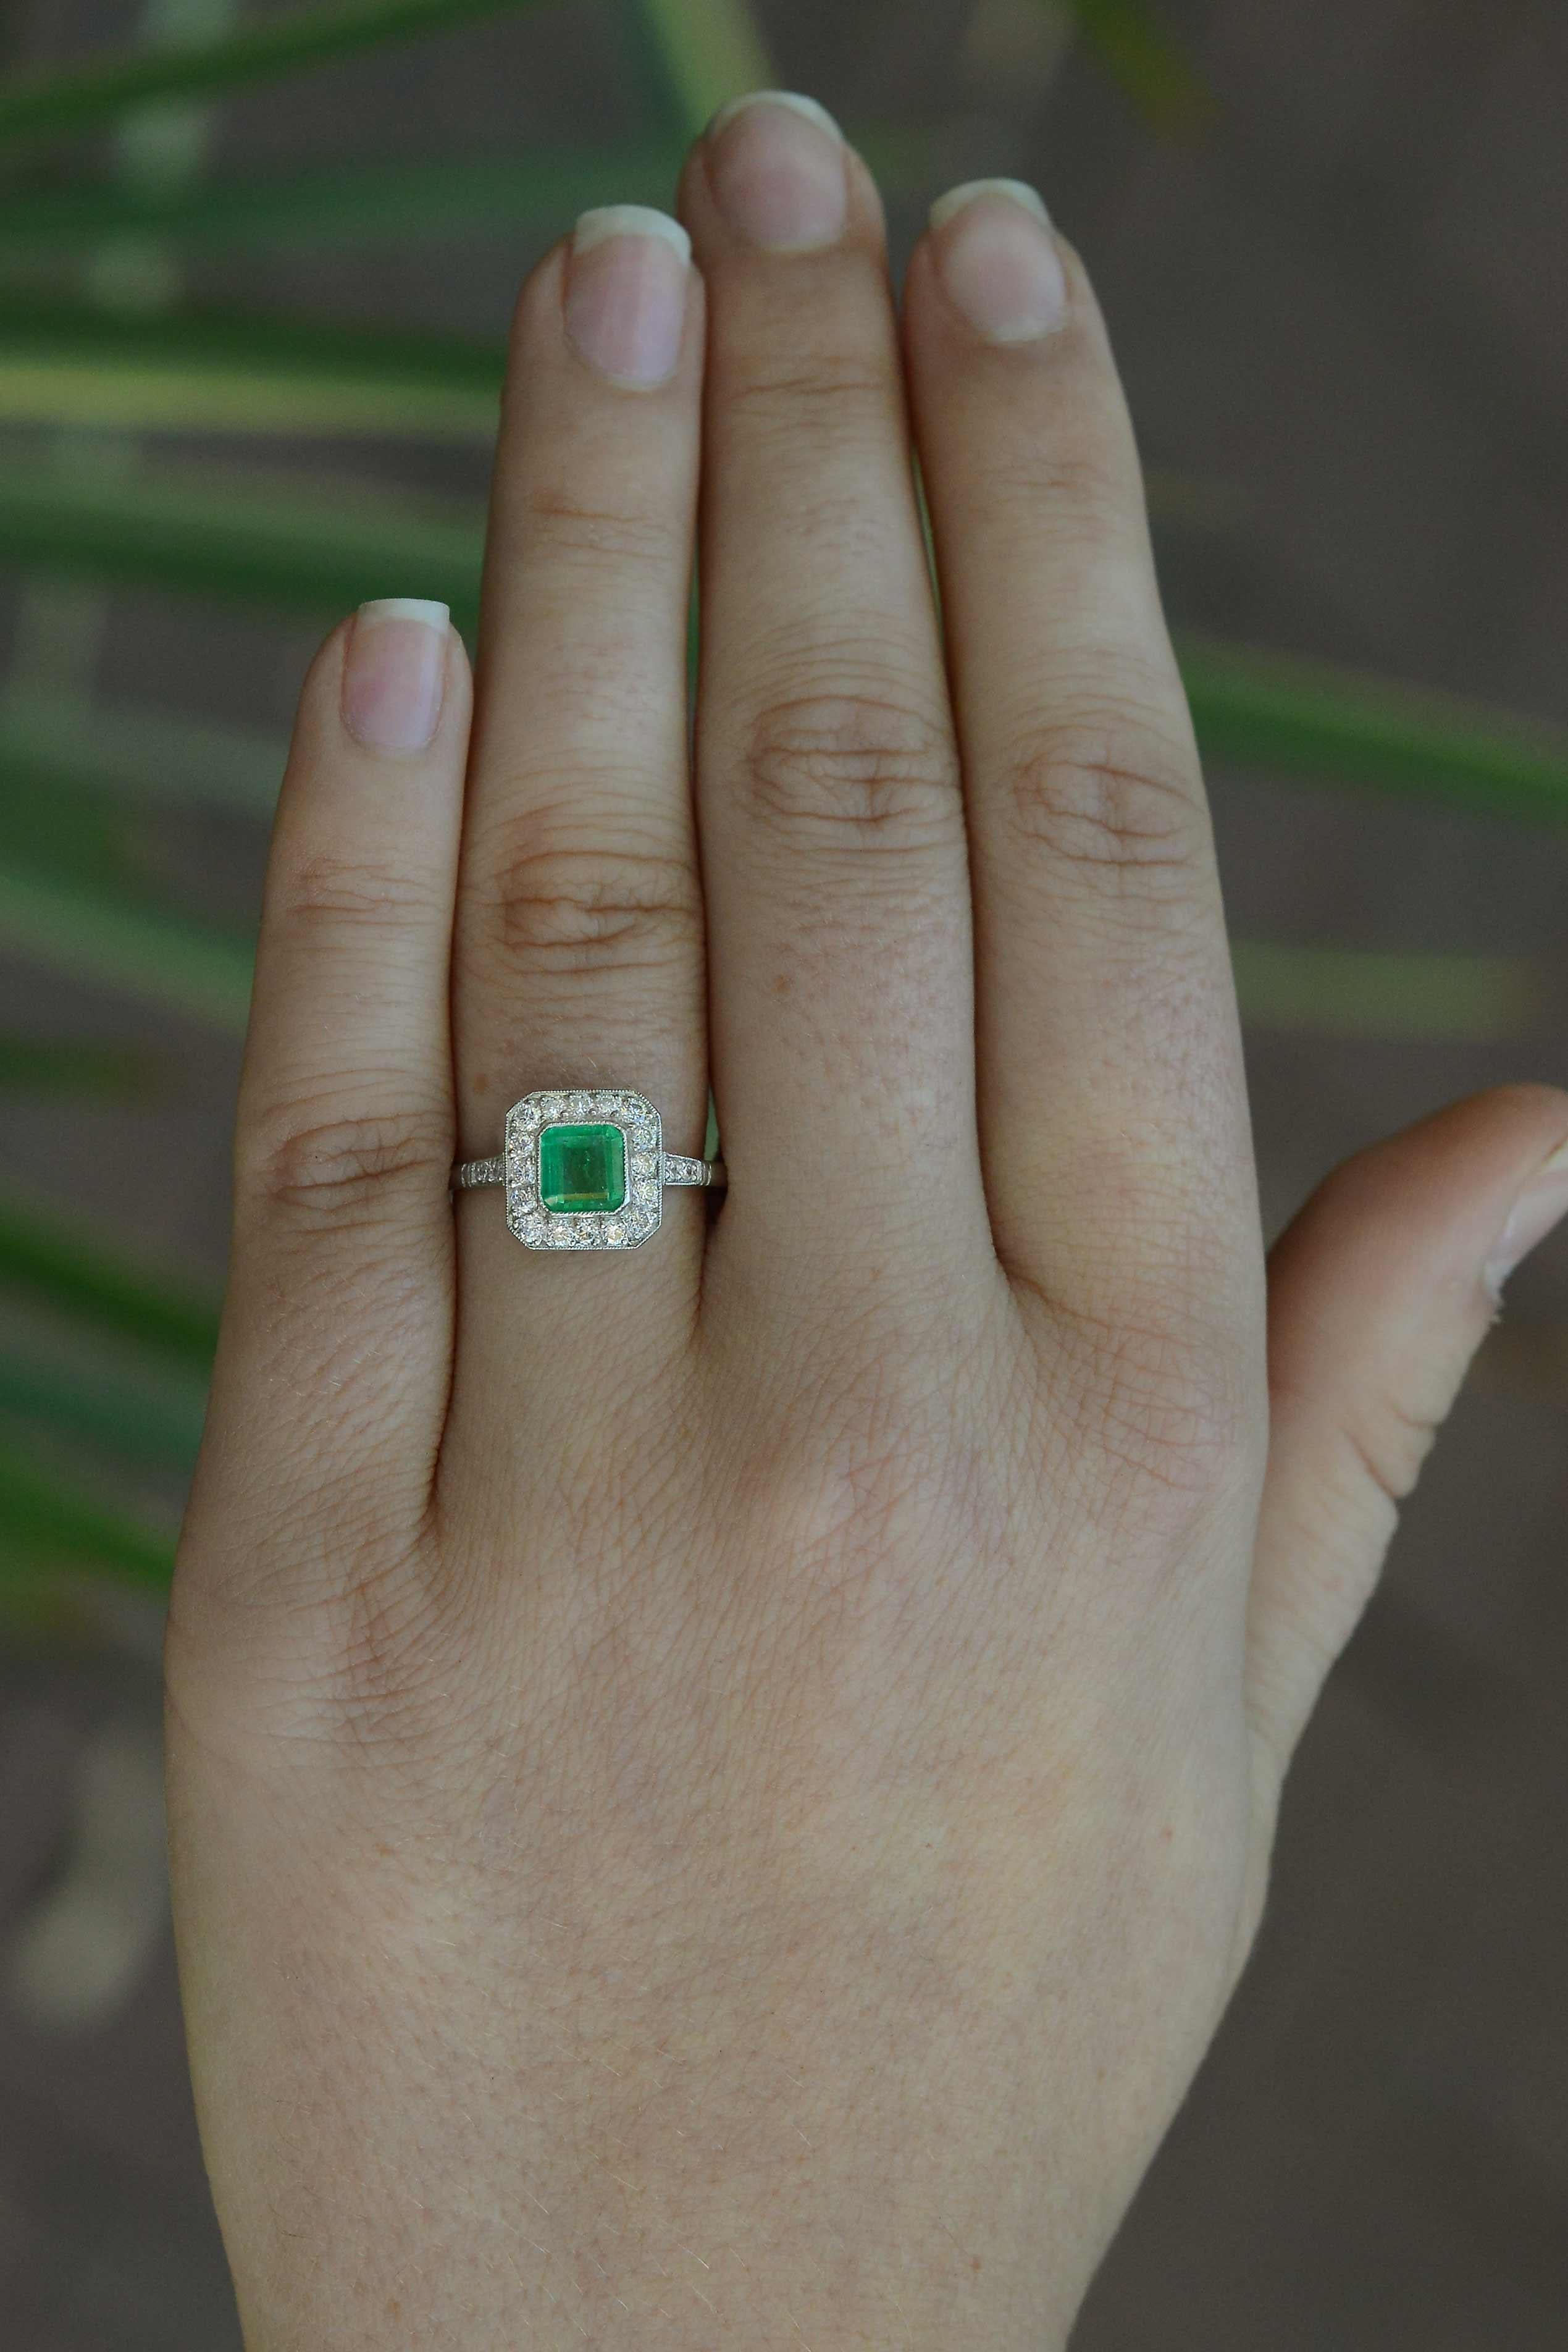 A breathtaking grass-green Colombian emerald engagement ring wows with a striking Art Deco style. The platinum setting features a gemstone that glows with a light from within its soul. Floating in a bezel setting and surrounded with a dainty halo of